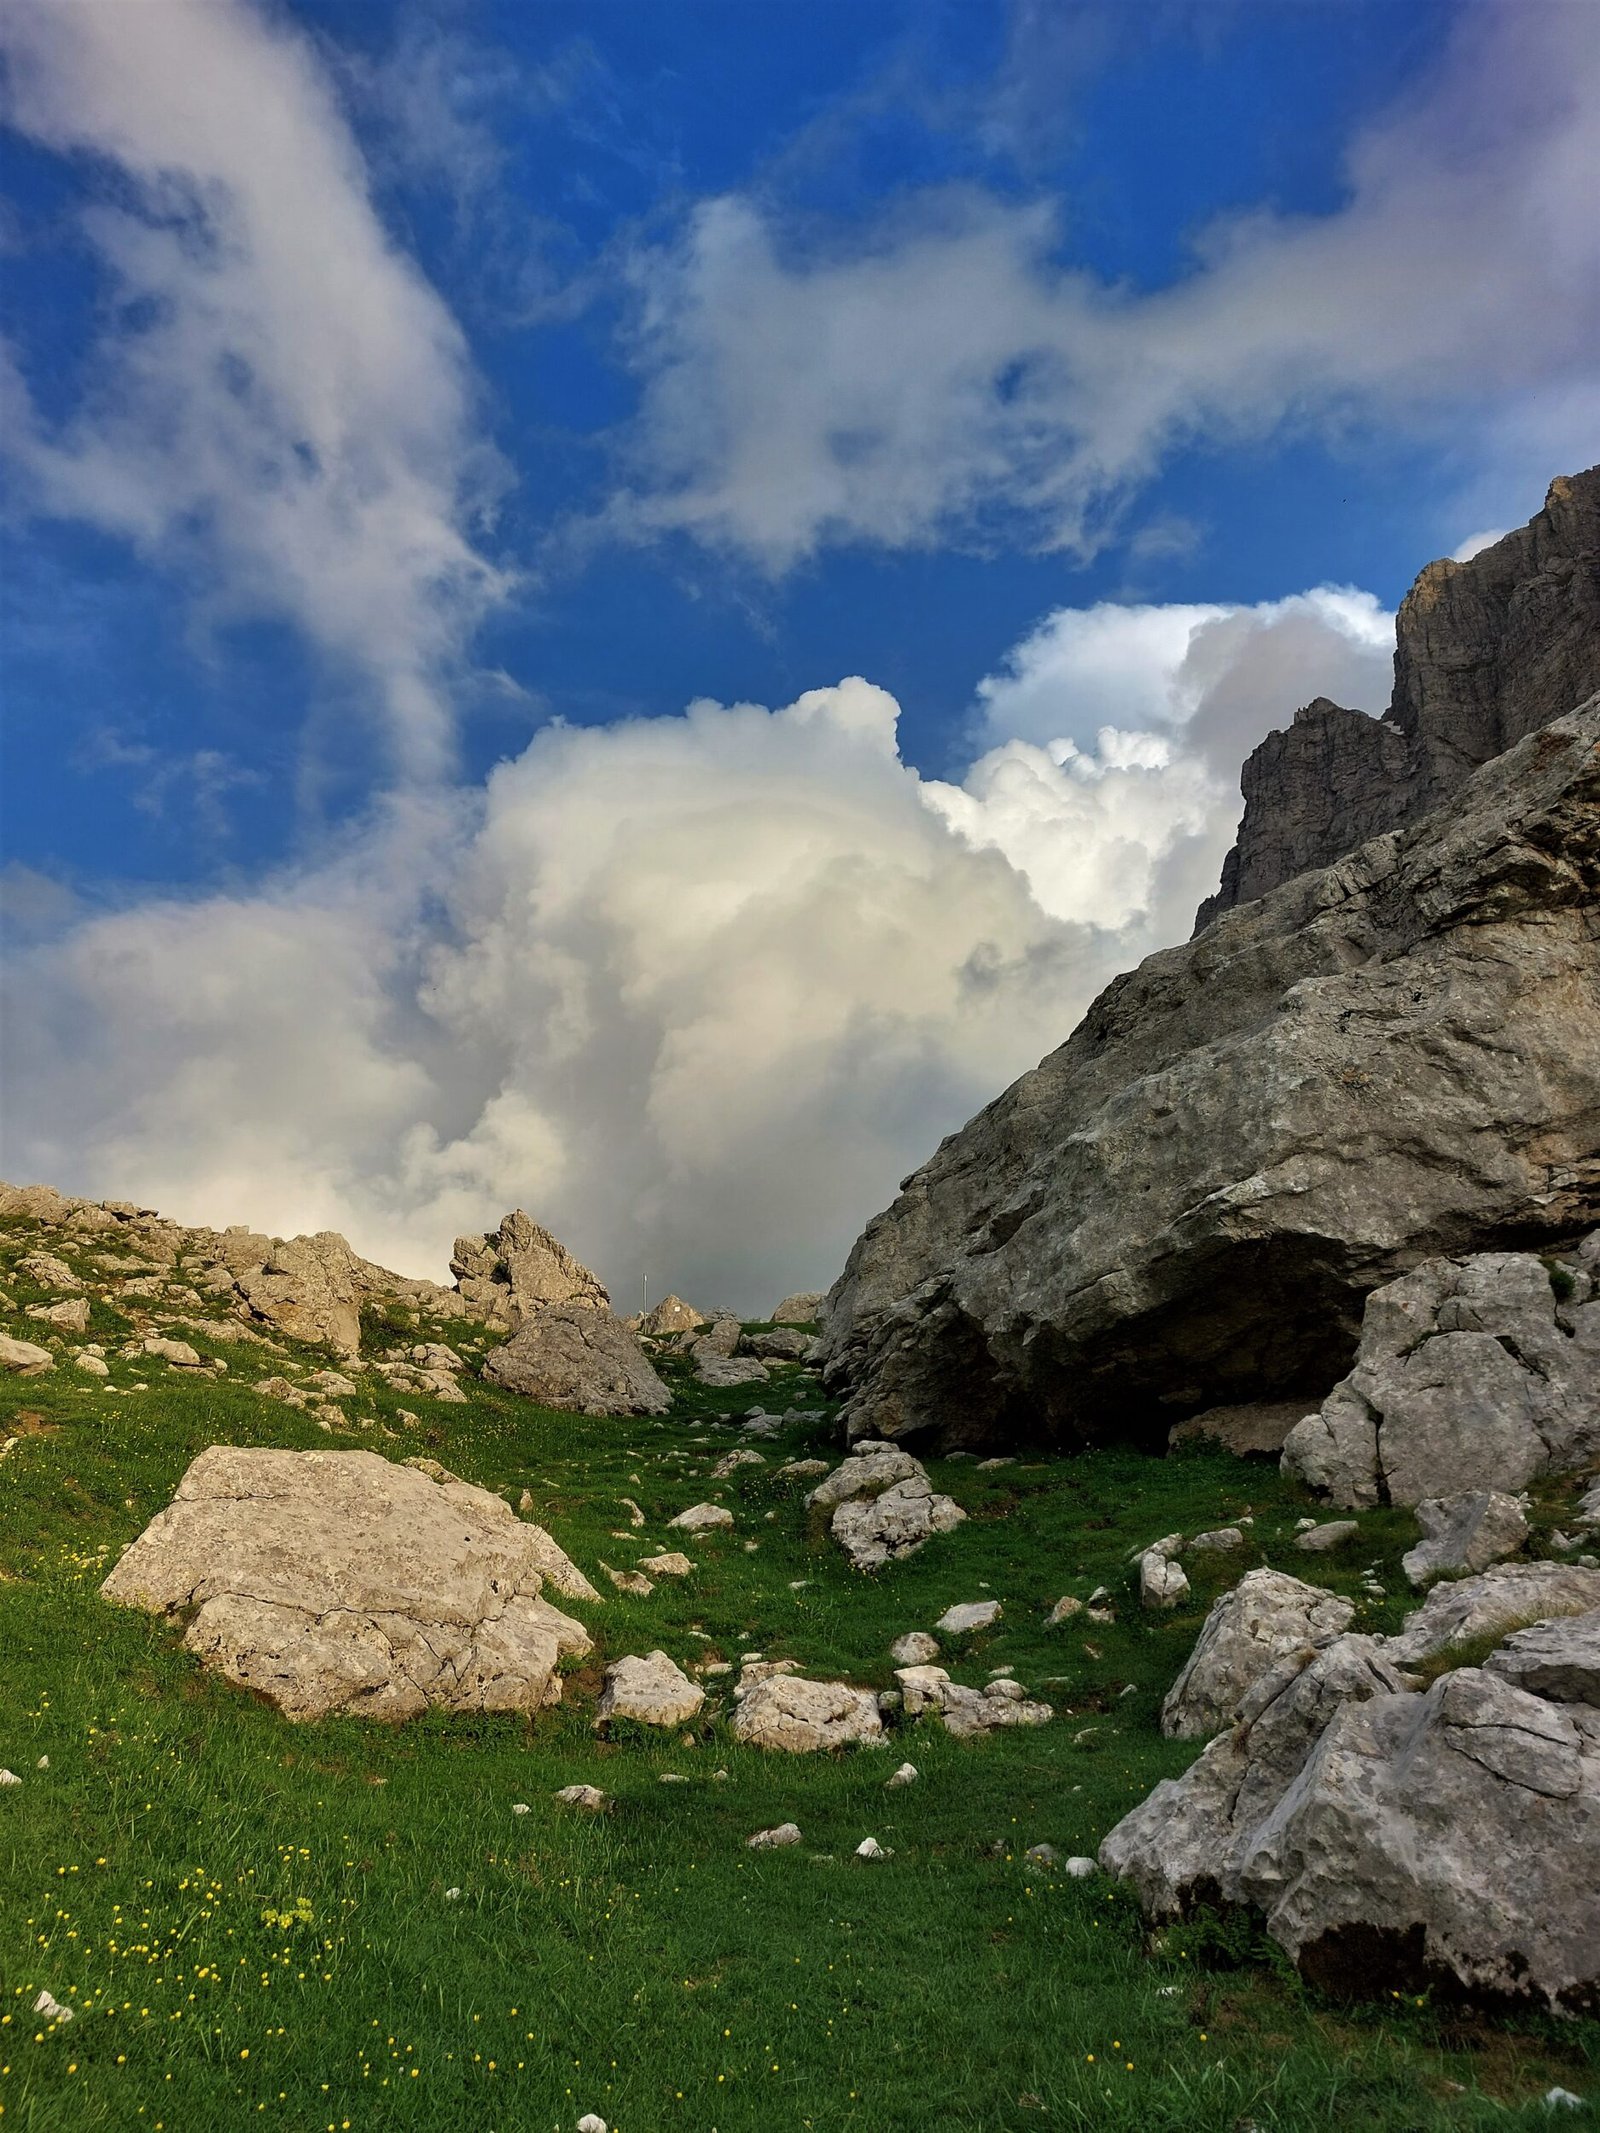 clouds tower above a rock-strewn slope